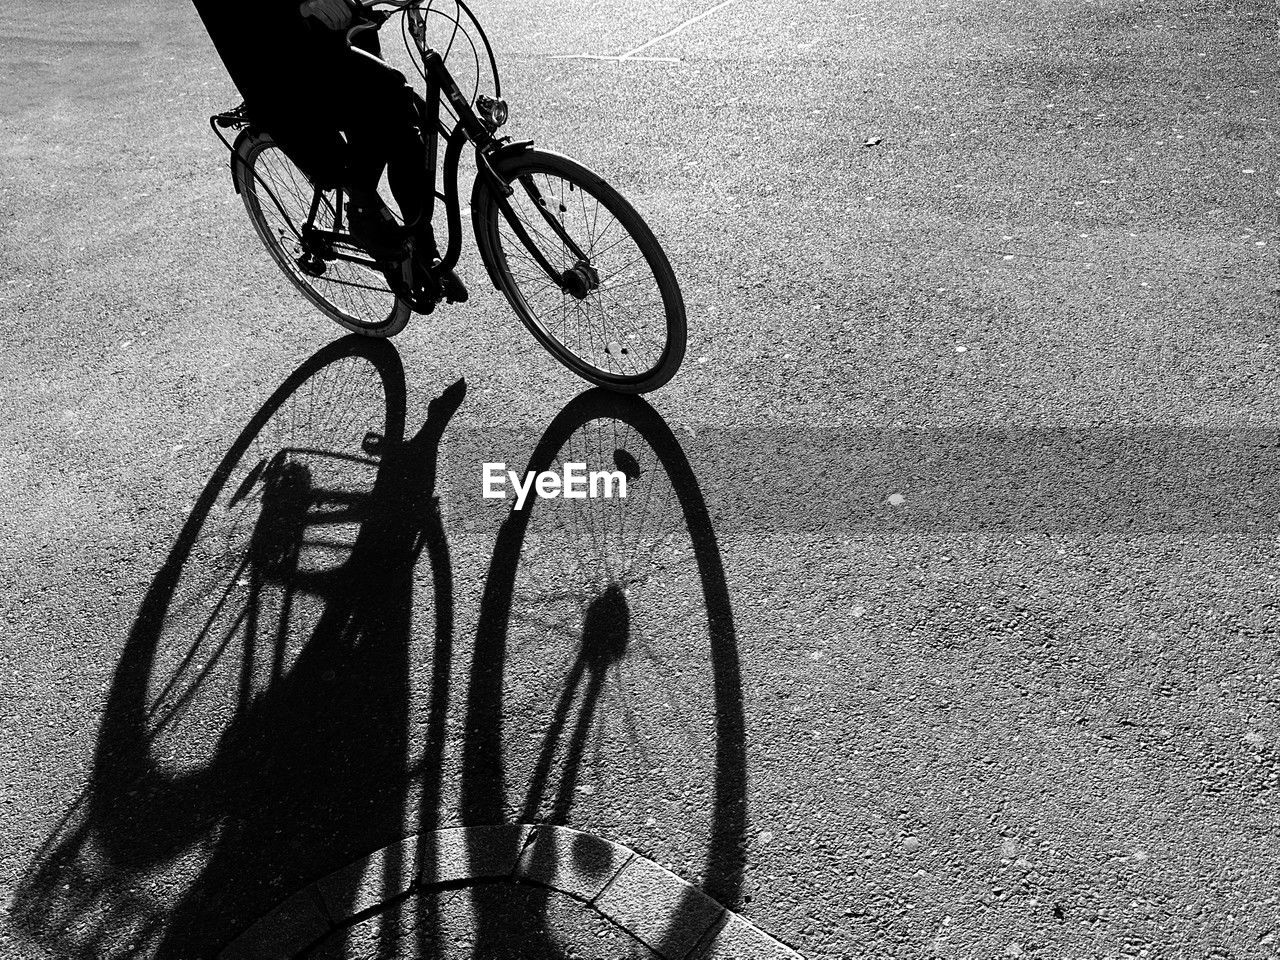 transportation, bicycle, land vehicle, black and white, mode of transportation, black, road bicycle, vehicle, shadow, monochrome, wheel, monochrome photography, street, day, city, cycling, sunlight, sports equipment, high angle view, road, sports, nature, no people, tarmac, outdoors, racing bicycle, bicycle wheel, cycle sport, white, tire, activity